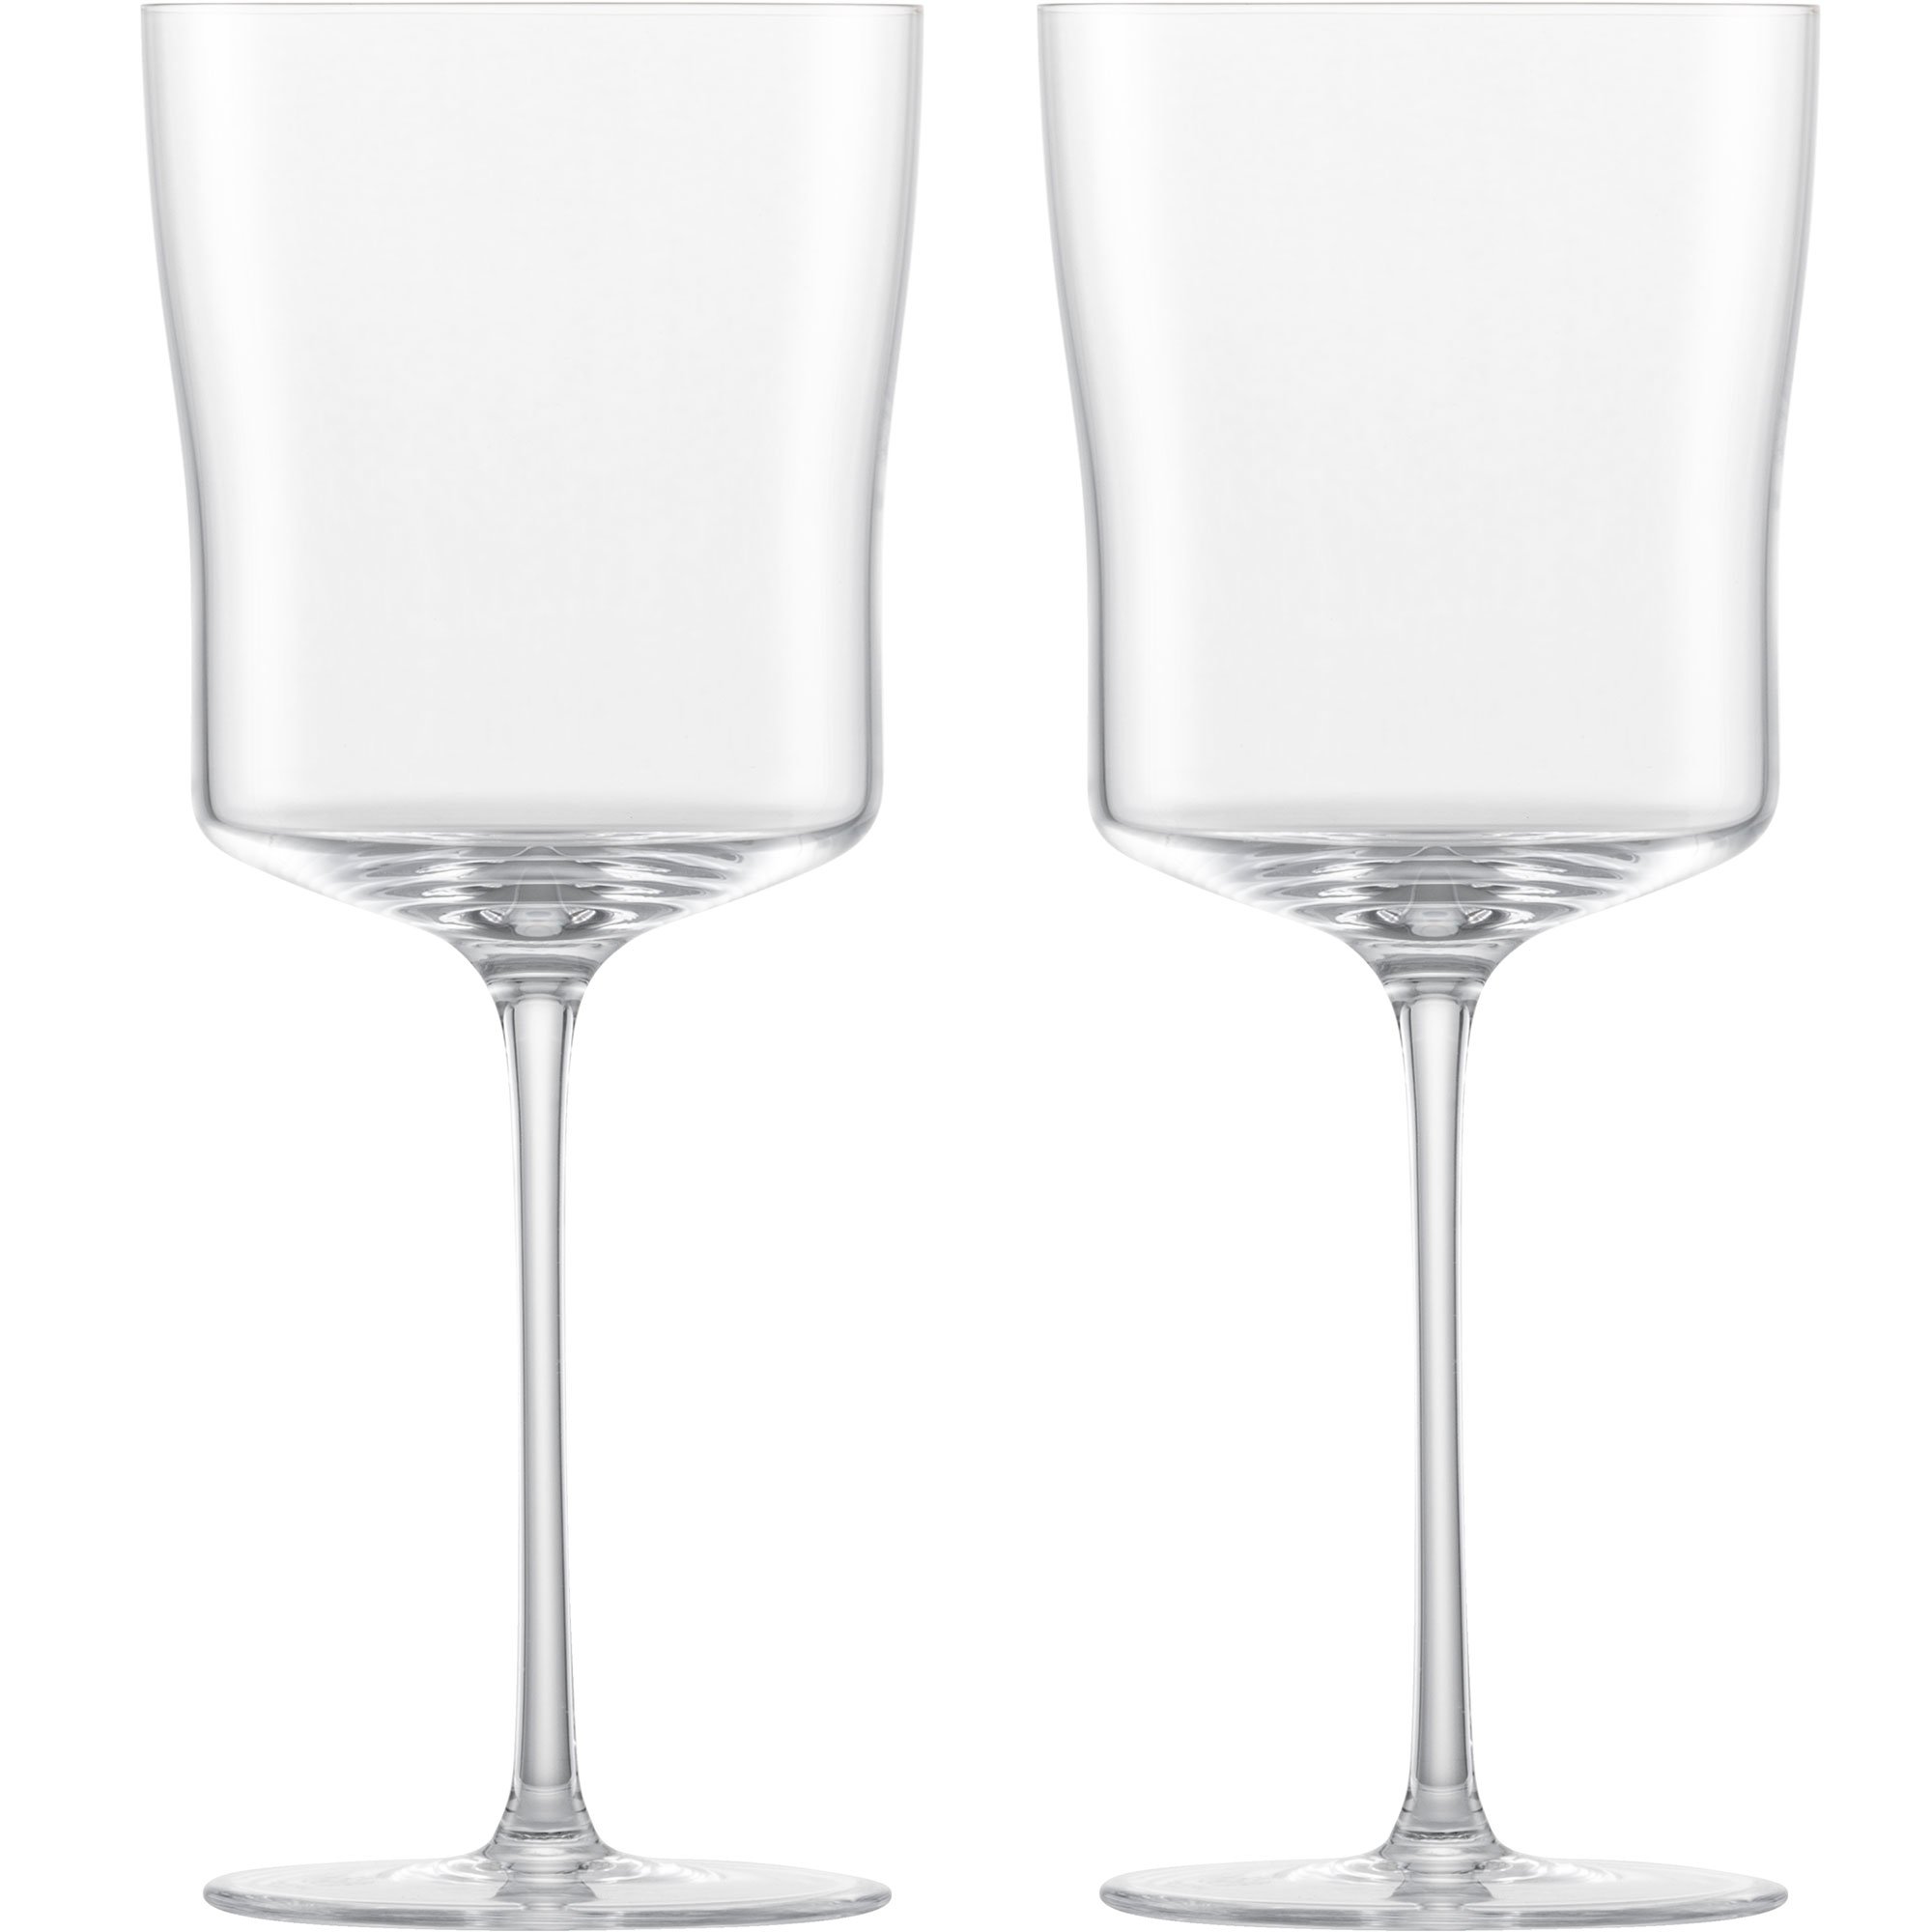 Zwiesel The Moment vattenglas 34,5 cl, 2-pack